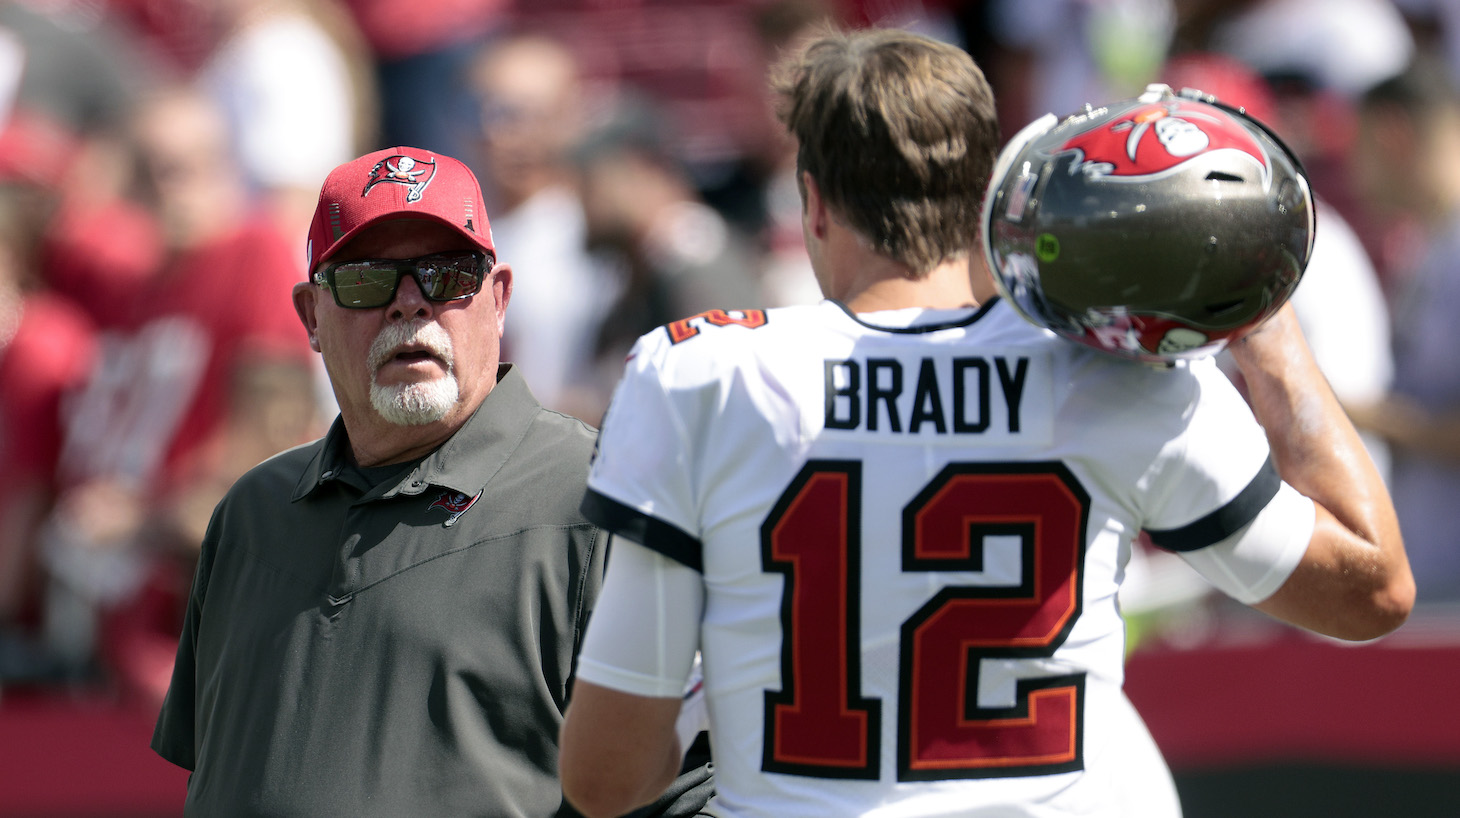 TAMPA, FLORIDA - SEPTEMBER 19: Head coach Bruce Arians and quarterback Tom Brady #12 of the Tampa Bay Buccaneers talk before the game against the Atlanta Falcons at Raymond James Stadium on September 19, 2021 in Tampa, Florida. (Photo by Douglas P. DeFelice/Getty Images)